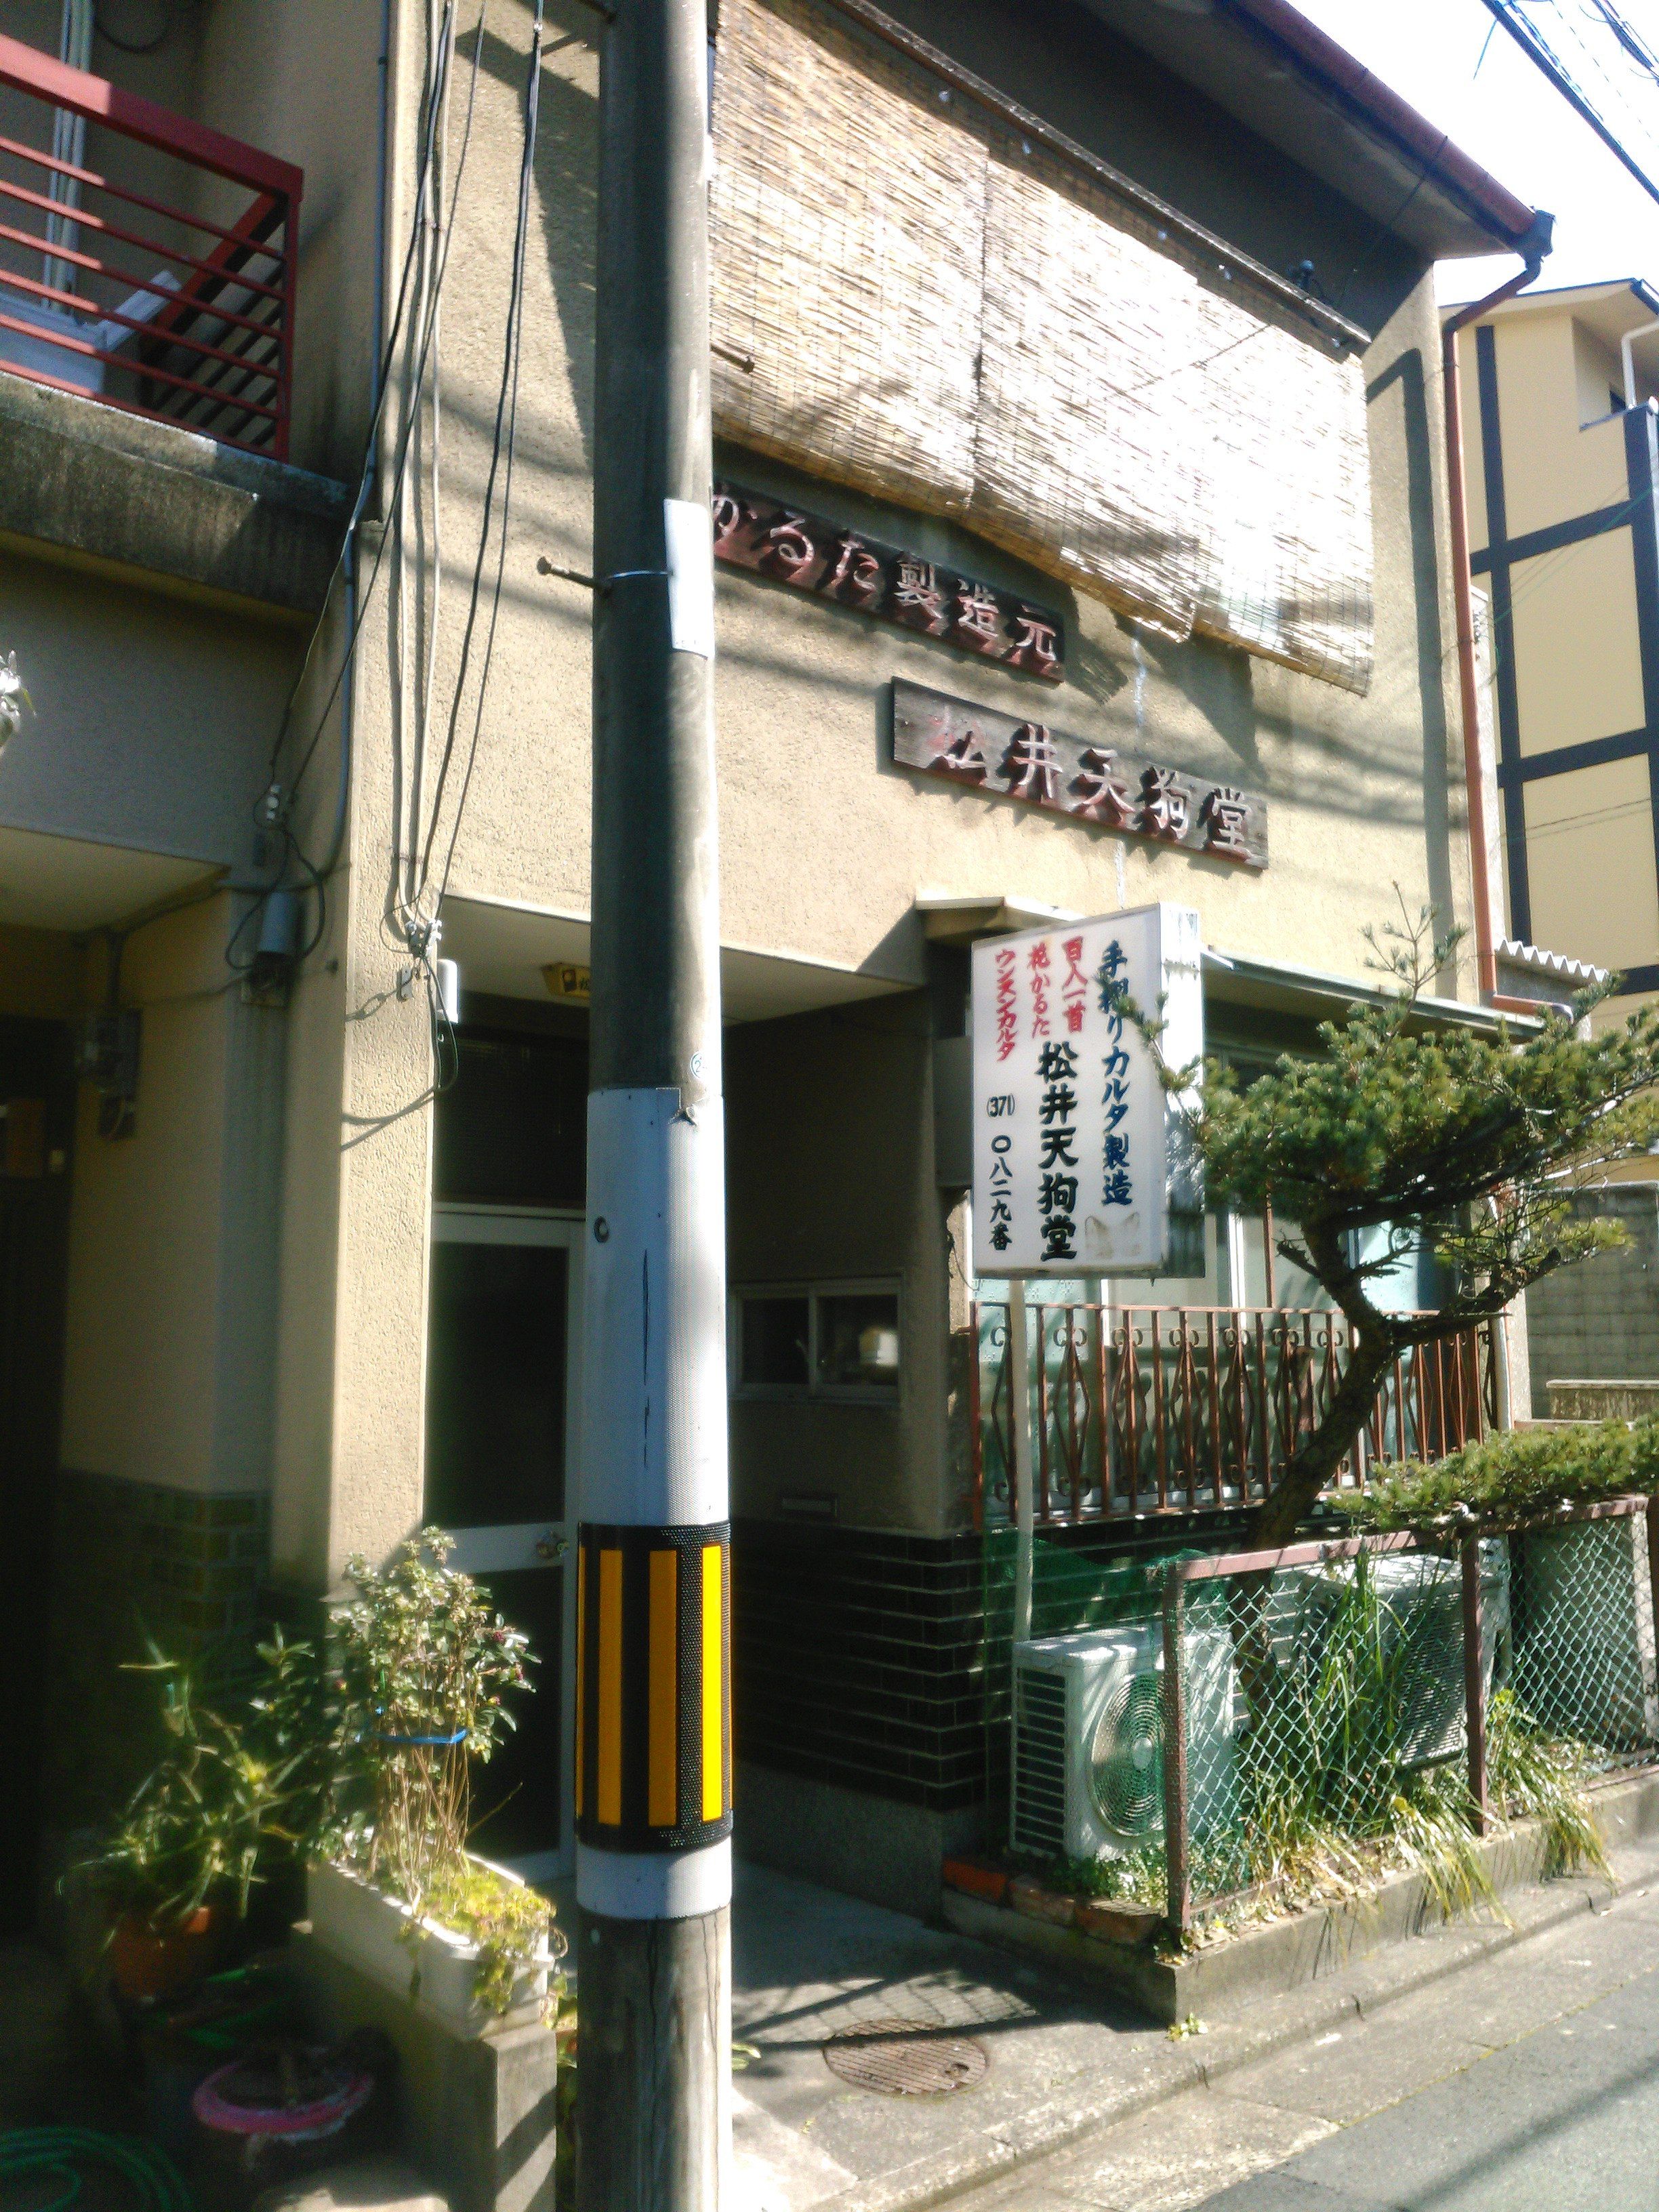 A Japanese storefront with disintegrating sign and a pine tree growing in front.